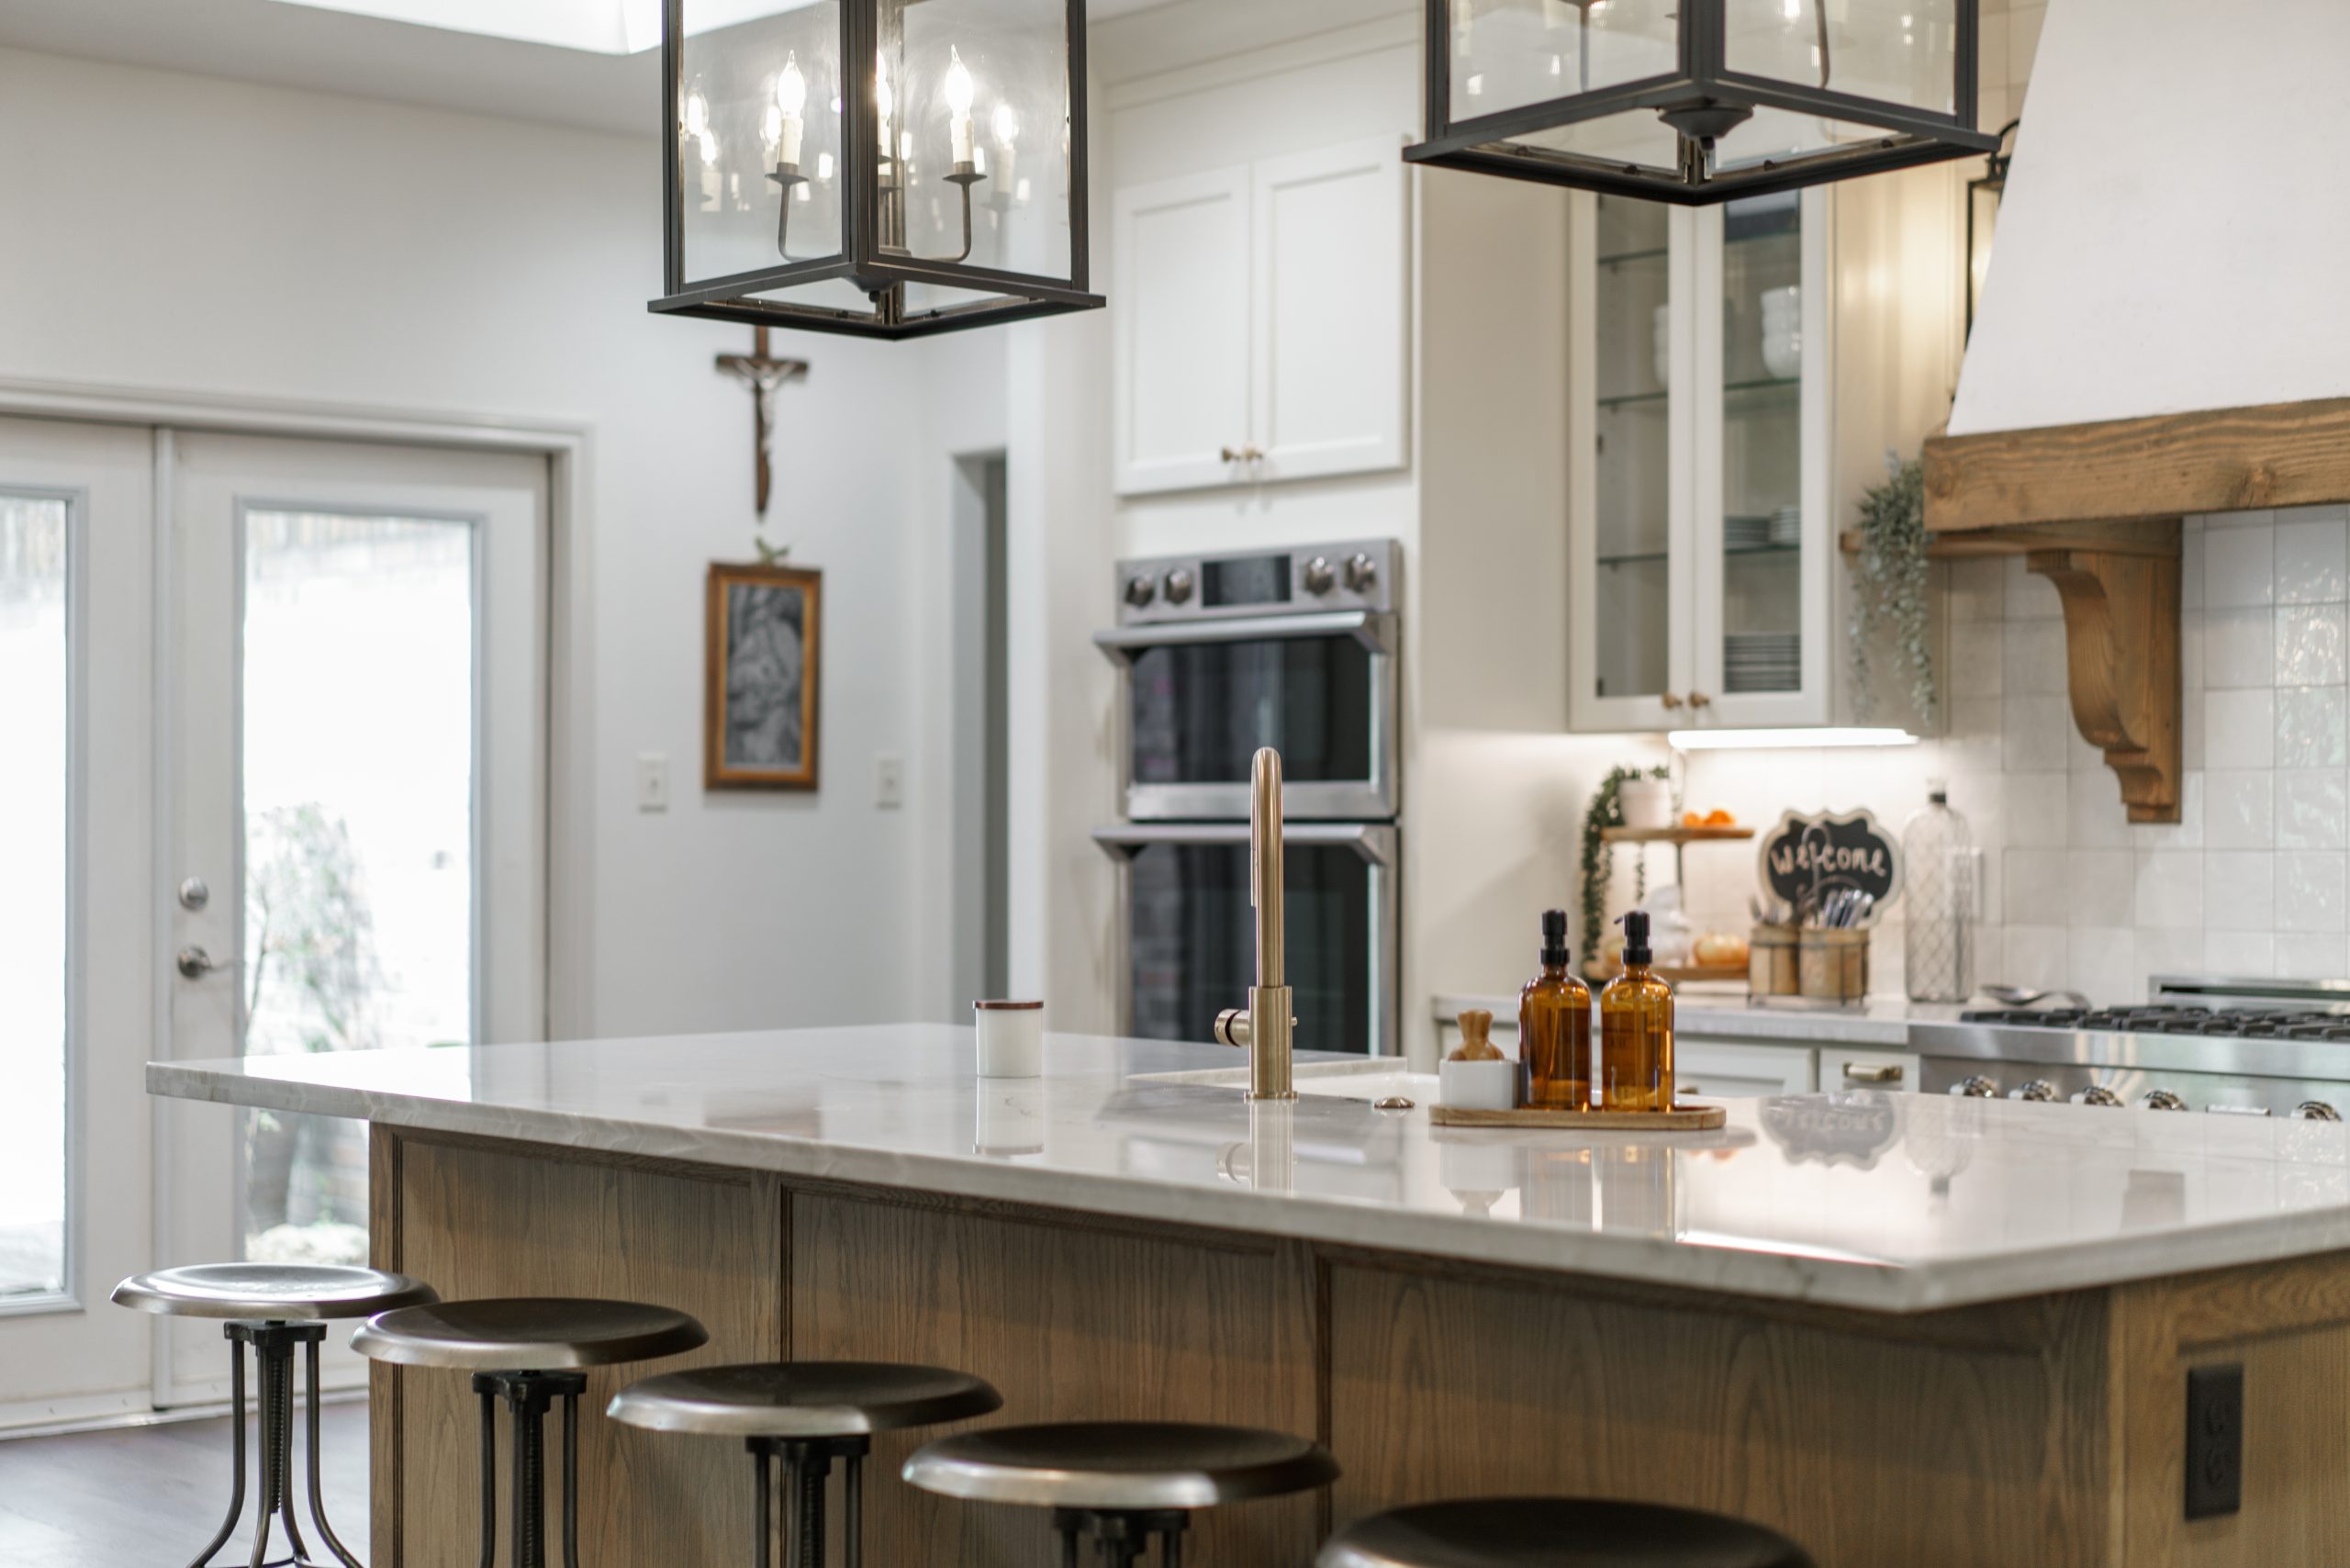 Good Company Construction in Bryan, Texas - Image of Kitchen detail